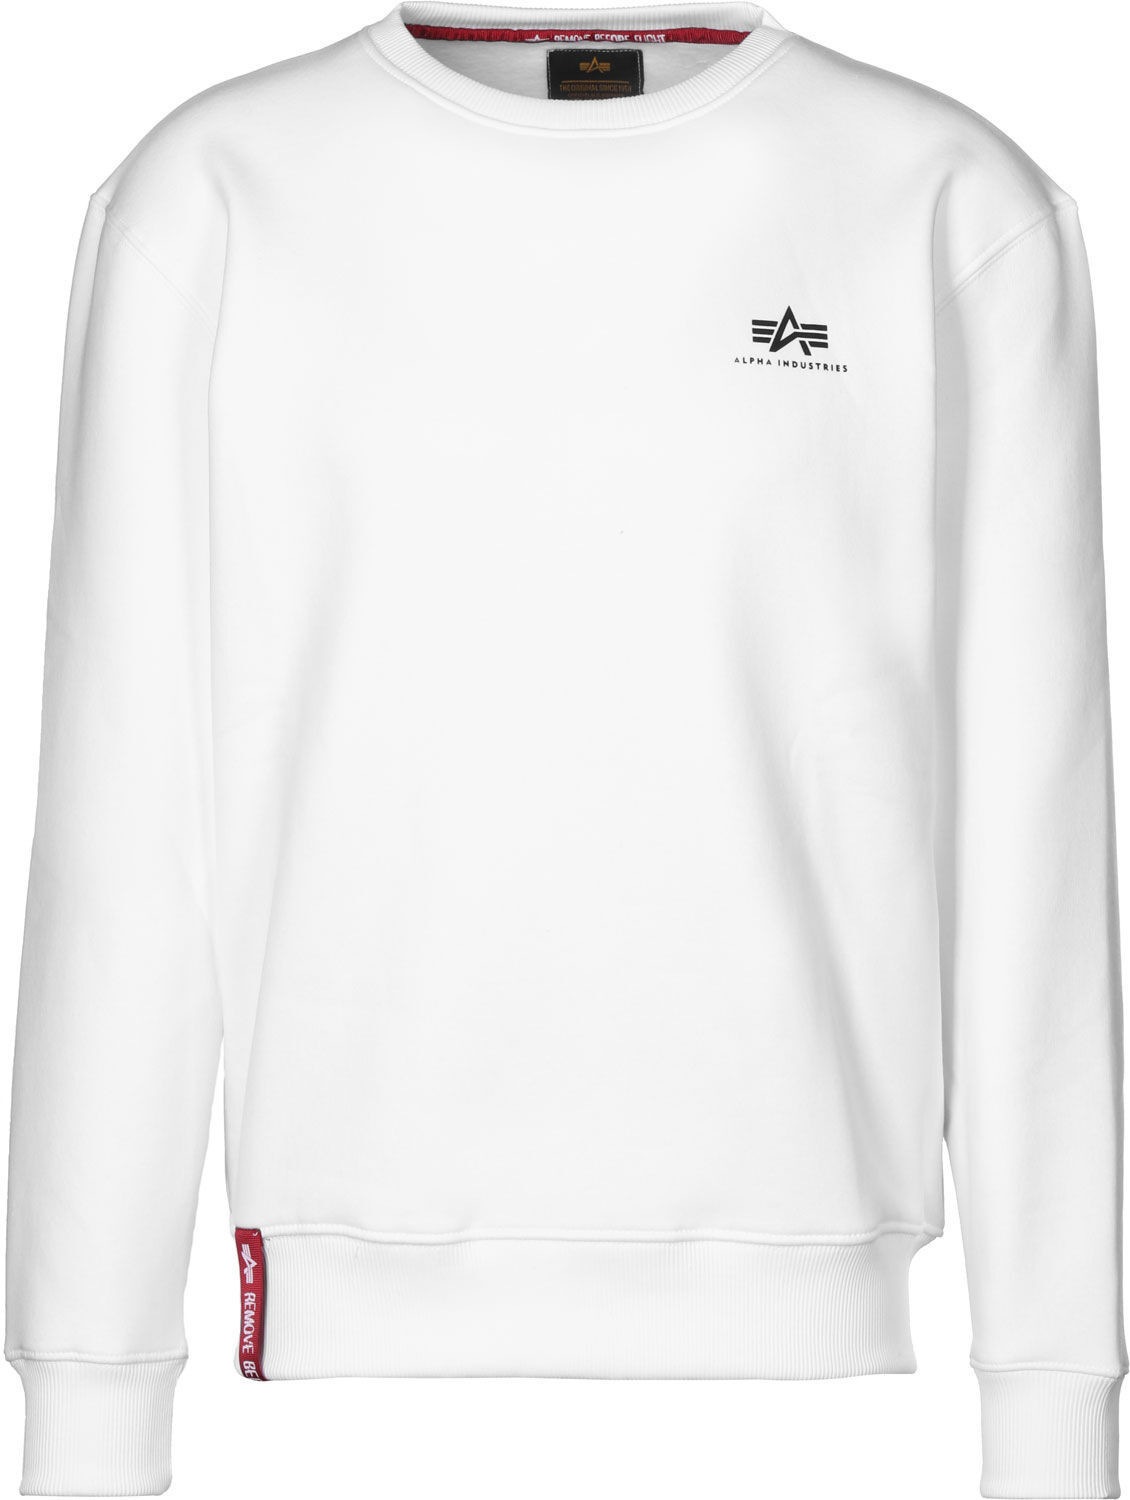 Sweater (188307/09) Logo 515 - Industries The - Basic Alpha White Small